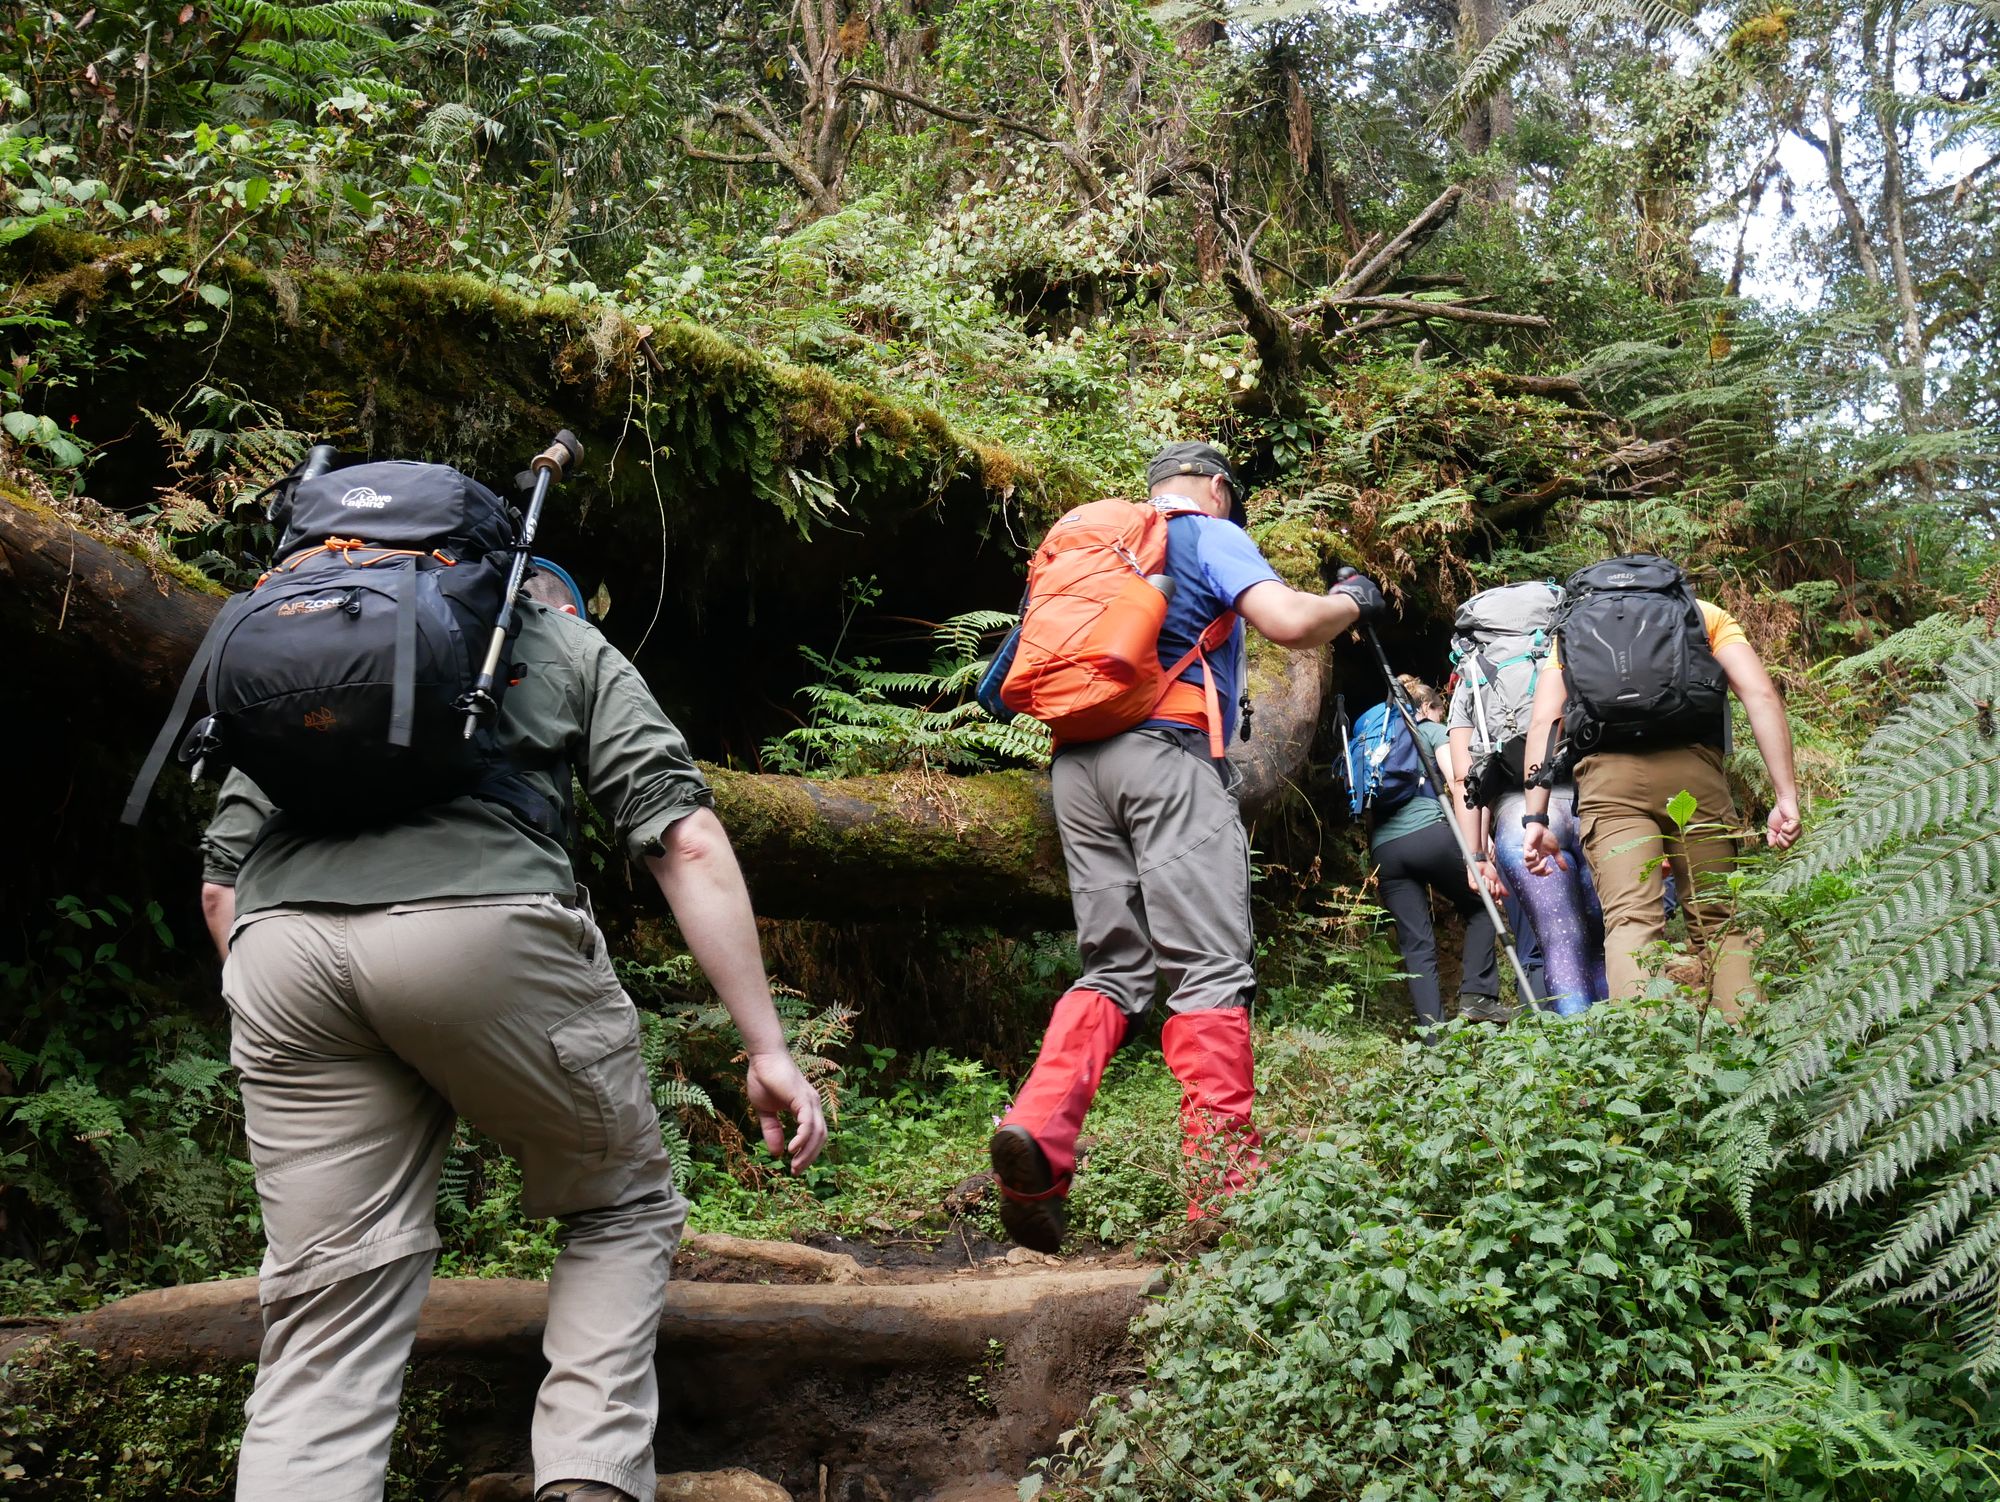 Hikers in the forest on the Machame Route up Kilimanjaro, Tanzania.